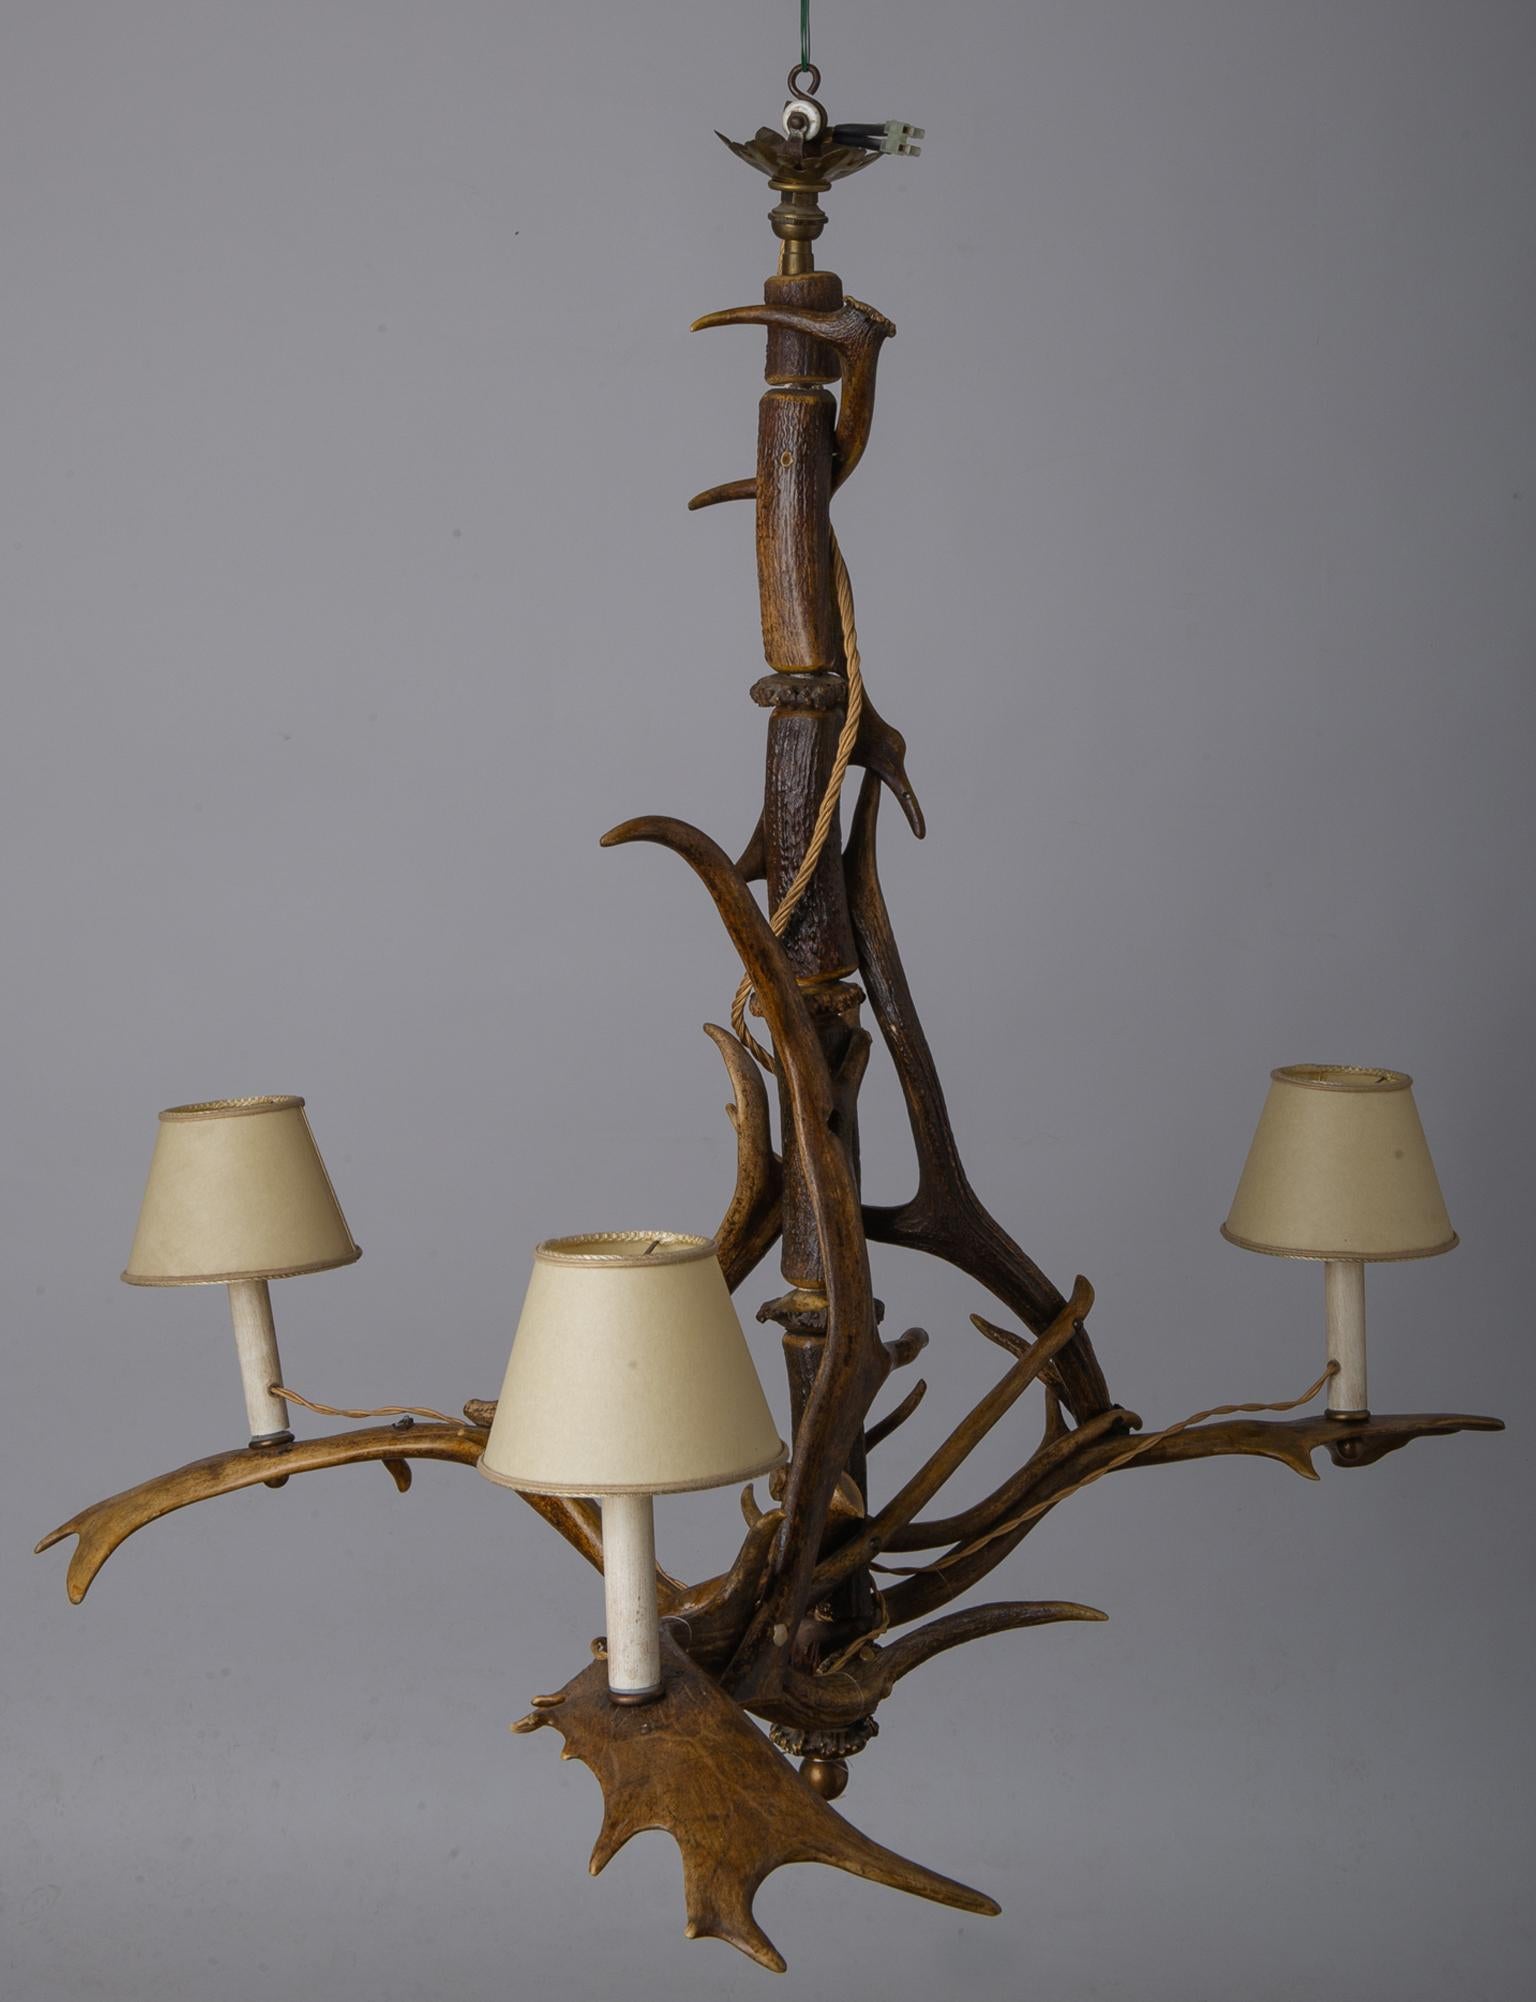 O/ 6267 - Old Austrian chandelier with deer antlers and three lights. It's original, but You can also change the candles and put simple attachments: Your electrician can do it too. Lucky who has a house to put it!